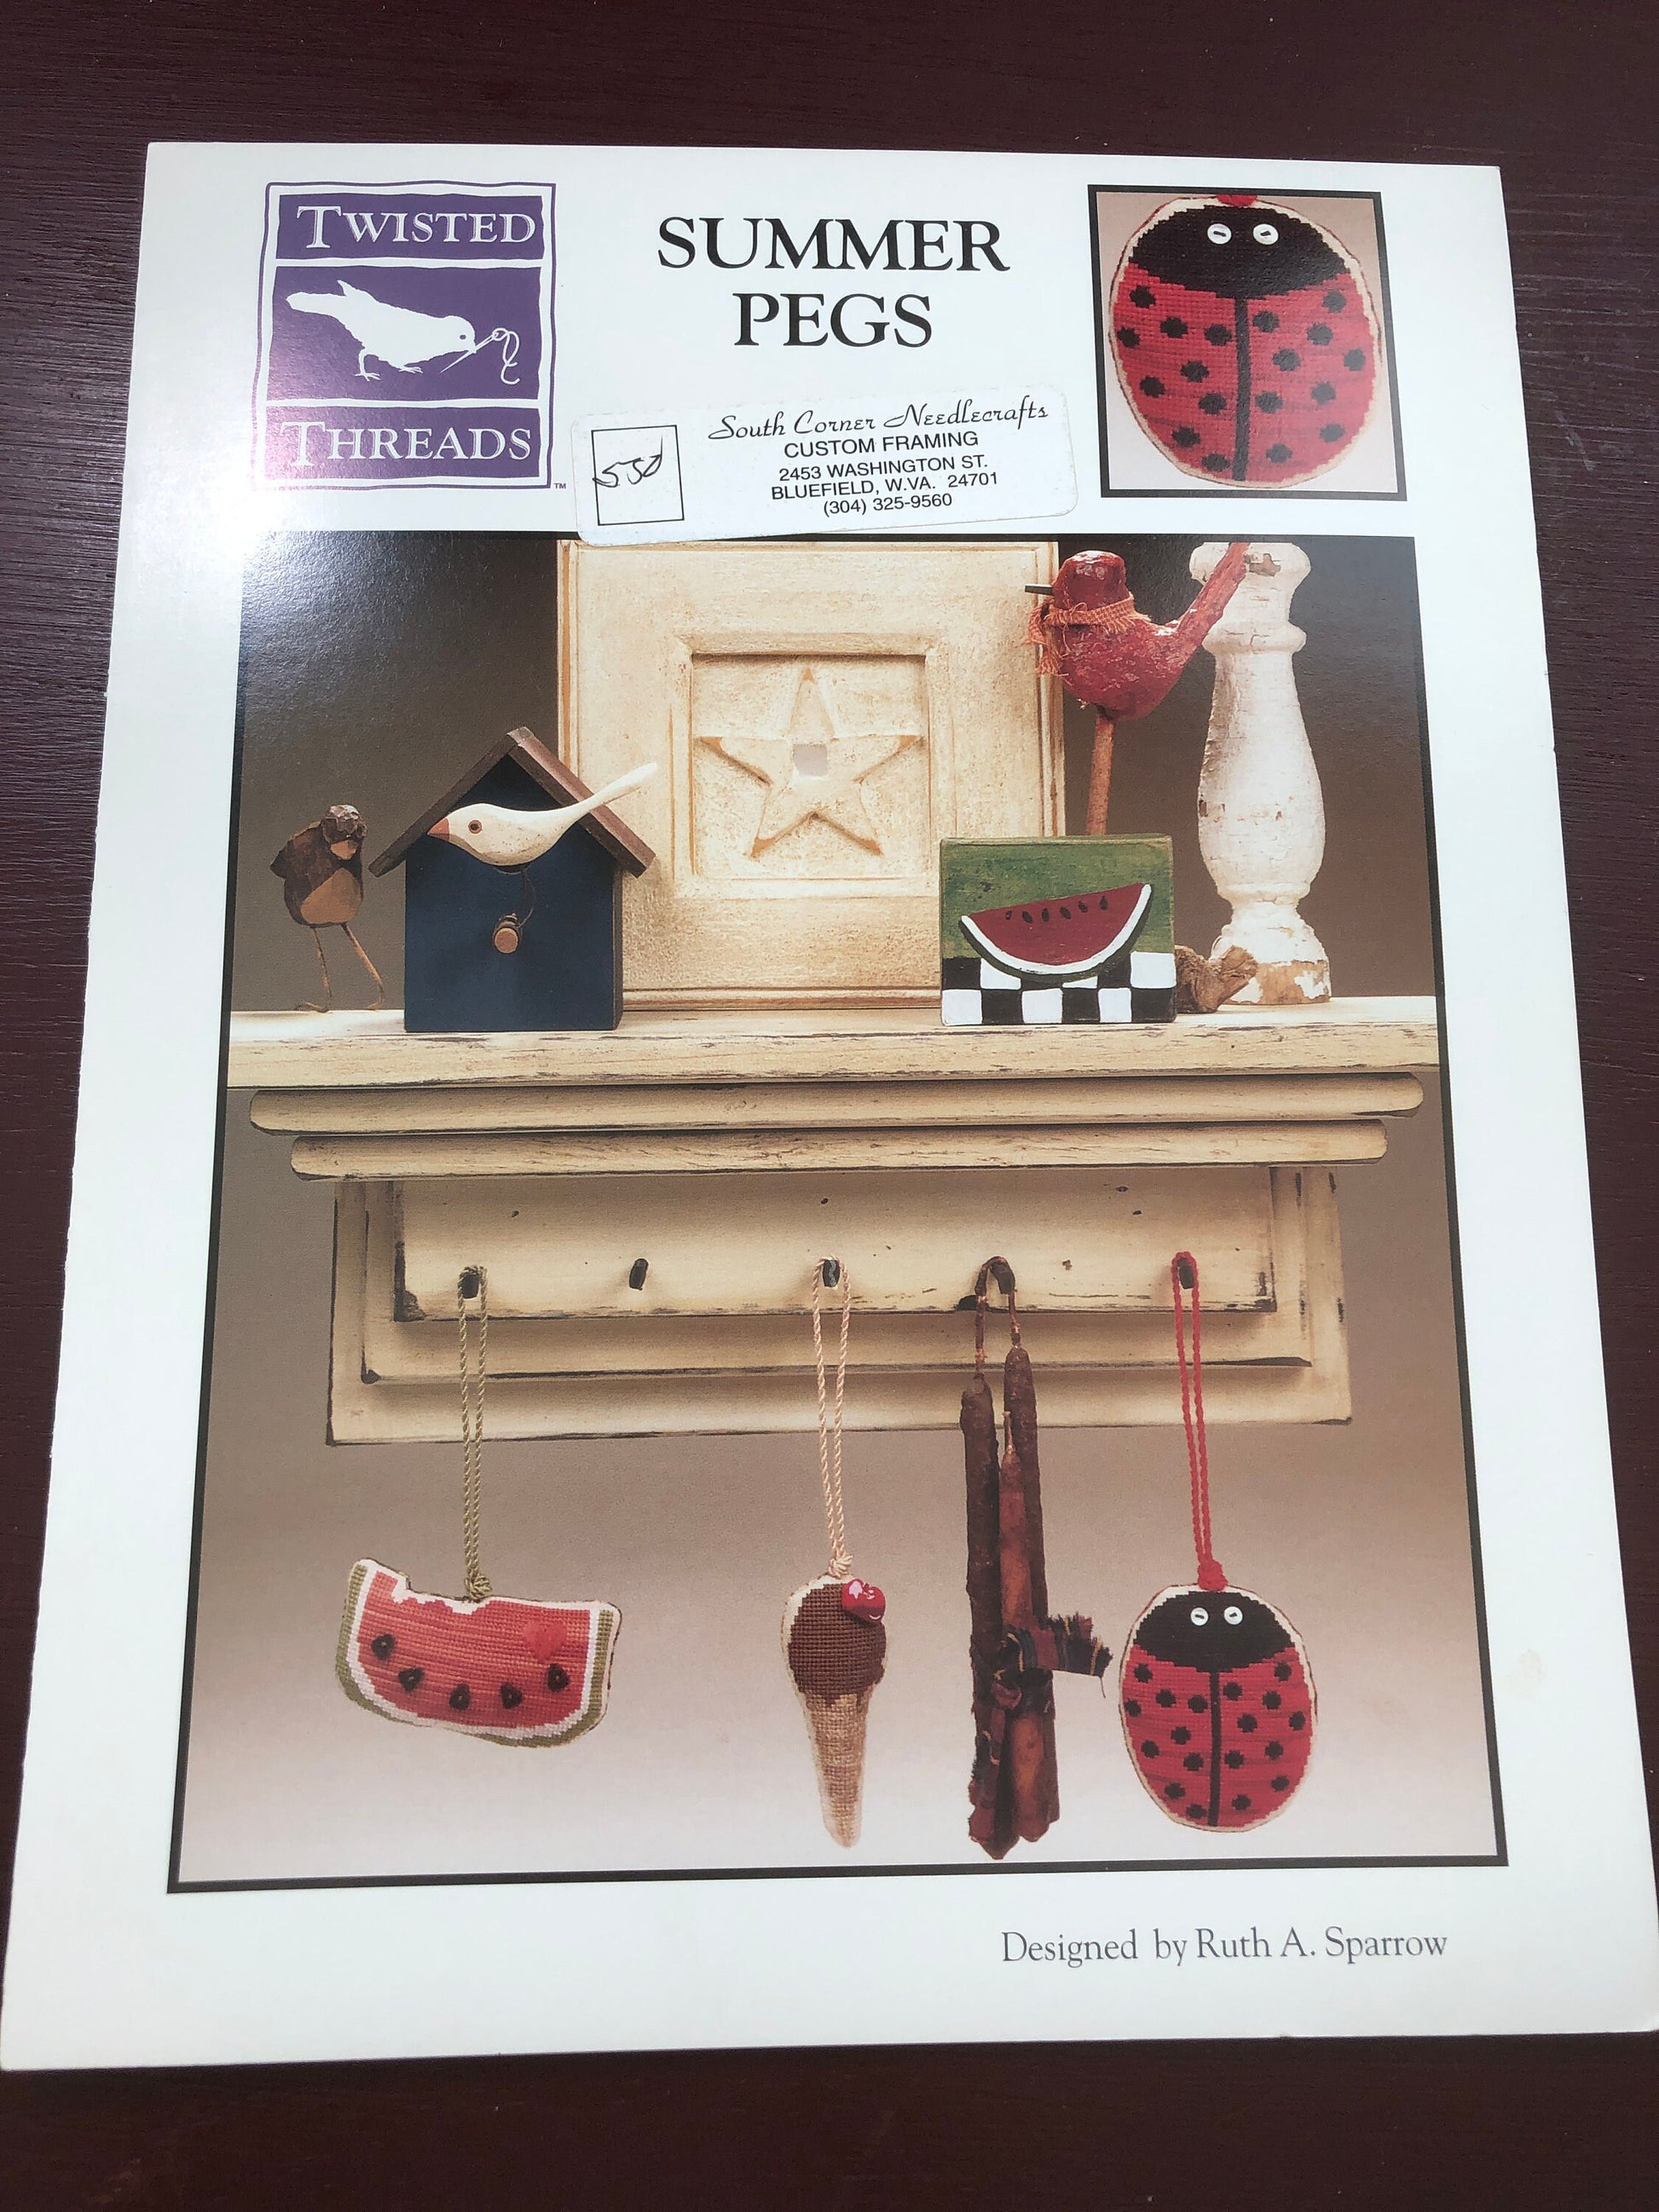 Summer Pegs, Twisted Threads, Designed by Ruth A. Sparrow, Vintage 1998, Counted Cross Stitch Patterns